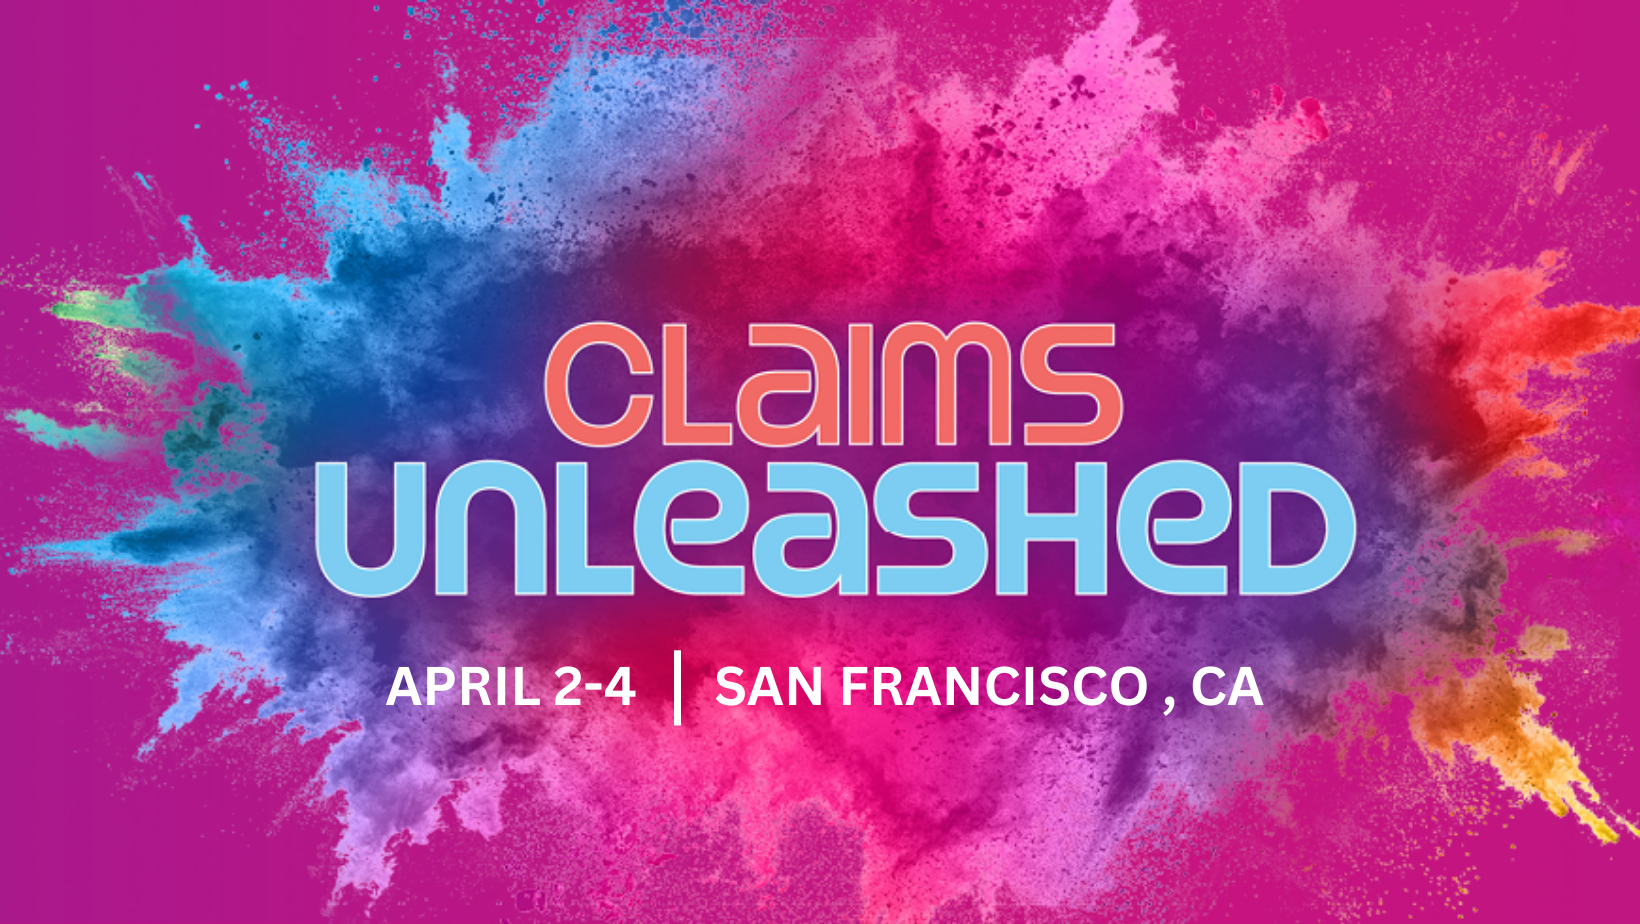 CLM Annual Conference / Claims Unleashed CHARLEE.AI